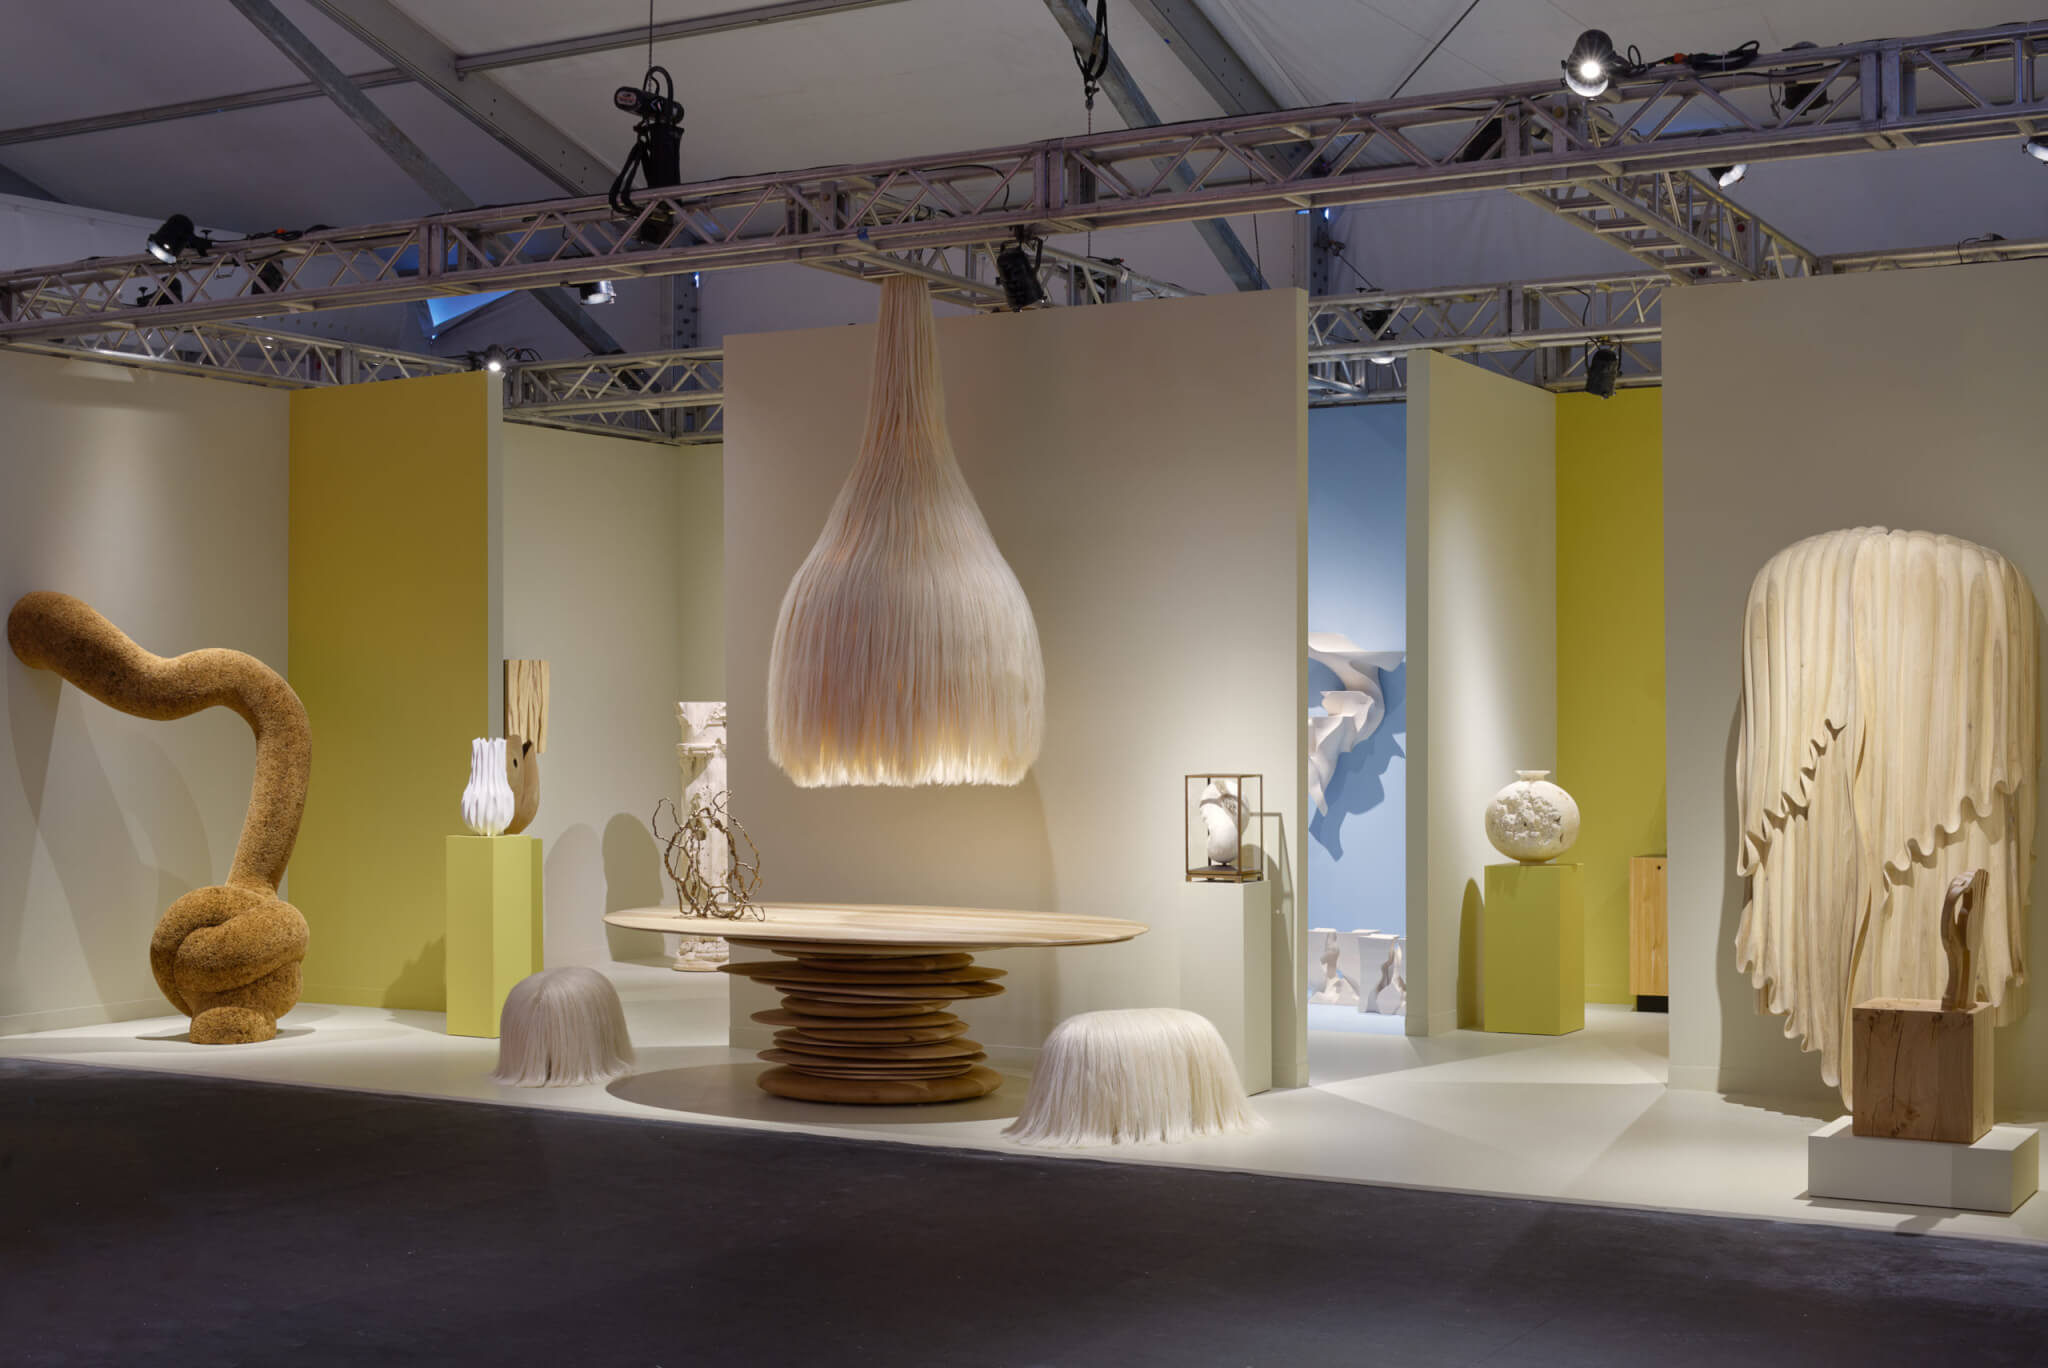 oddly shaped light fixtures and furnishings staged in exhibition space